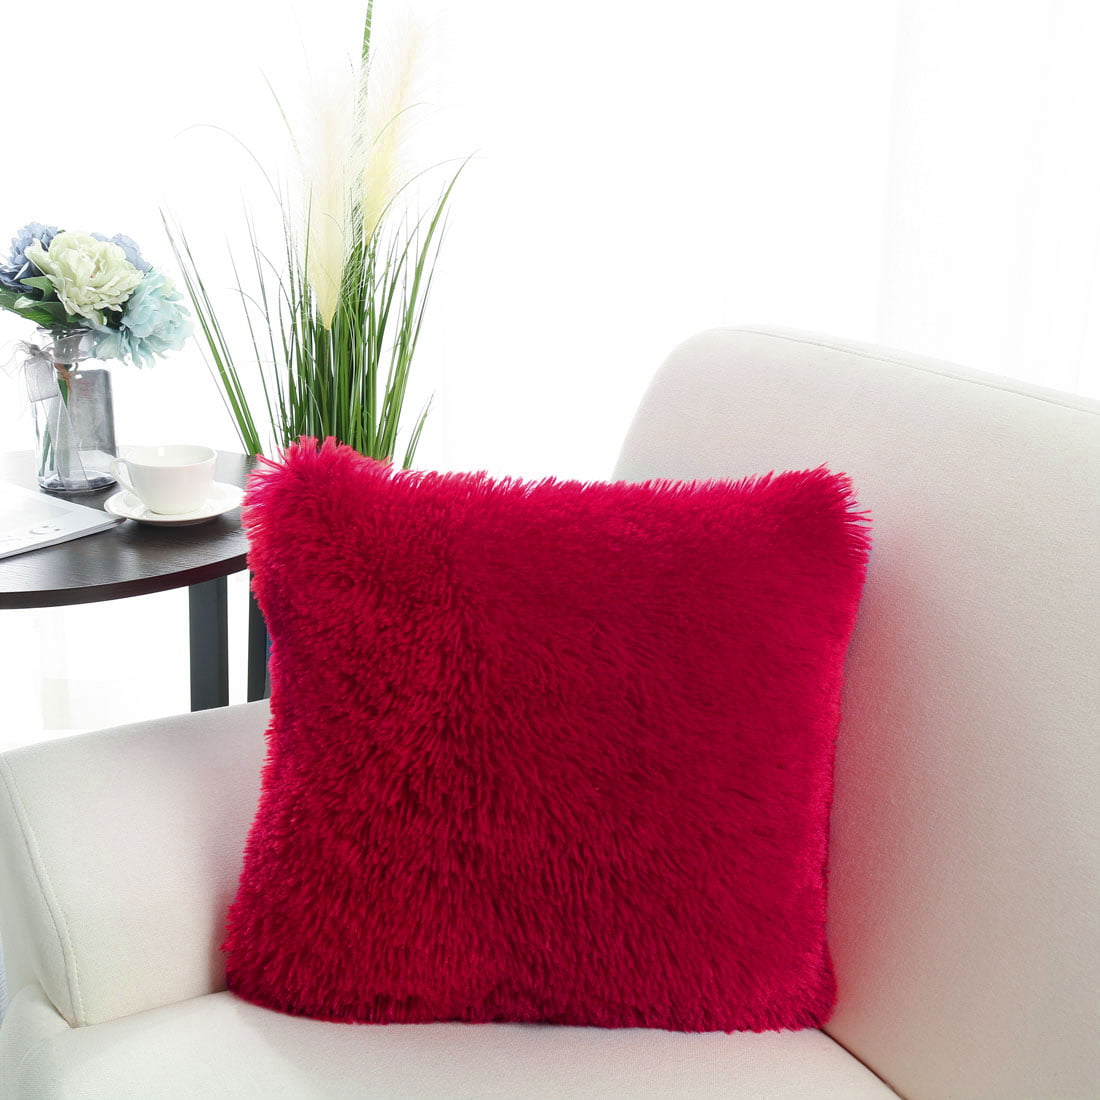 Details about   US Faux Fur Fluffy Plush Throw Pillow Cases Shaggy Soft Velvet Cushion Cover Bed 